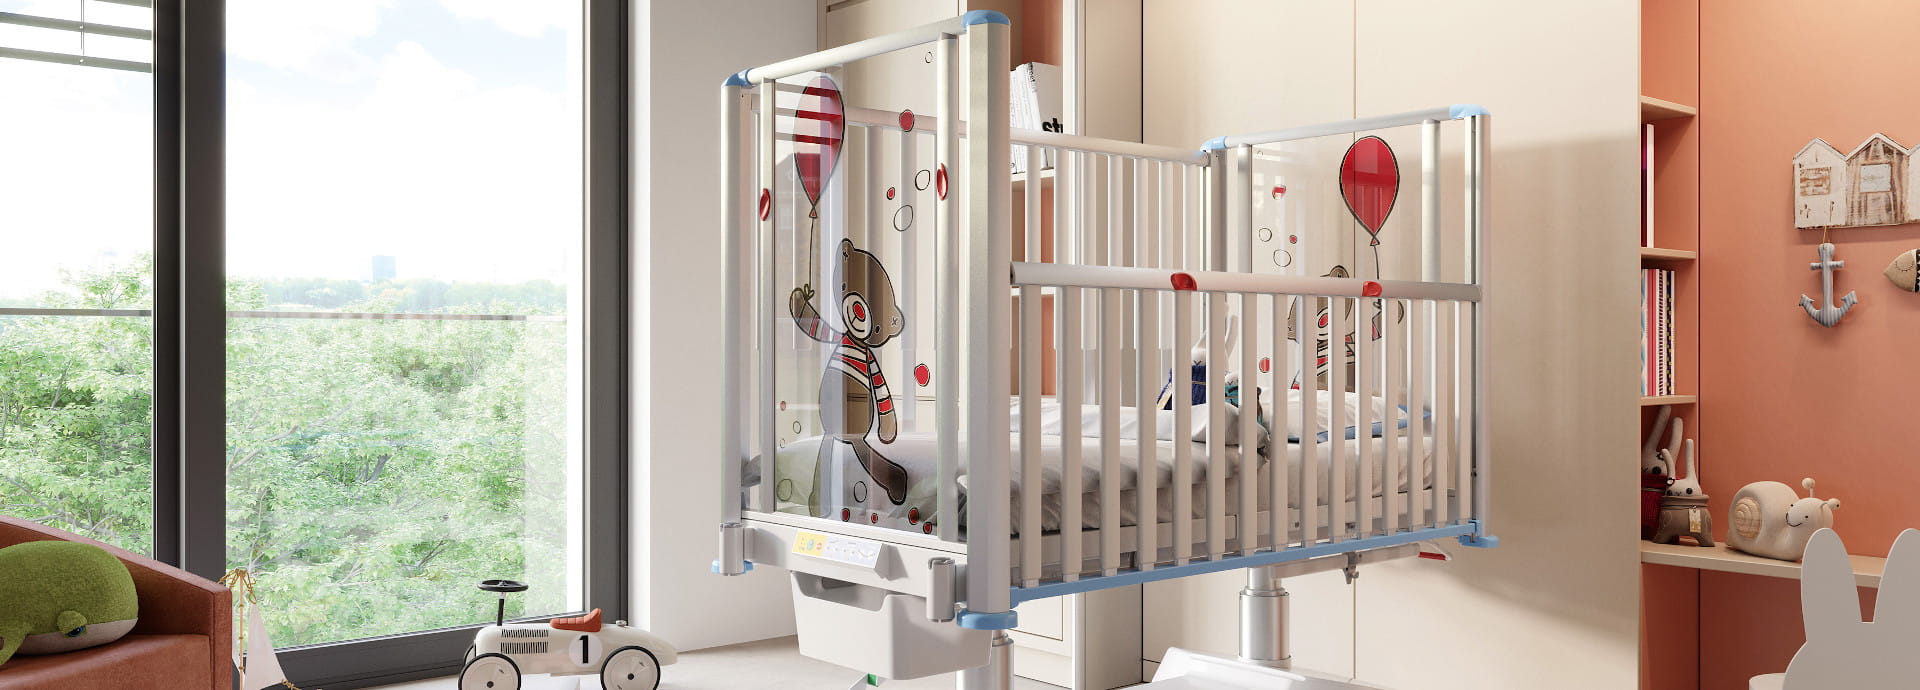 tom 2 - The fully electrically adjustable toddler bed